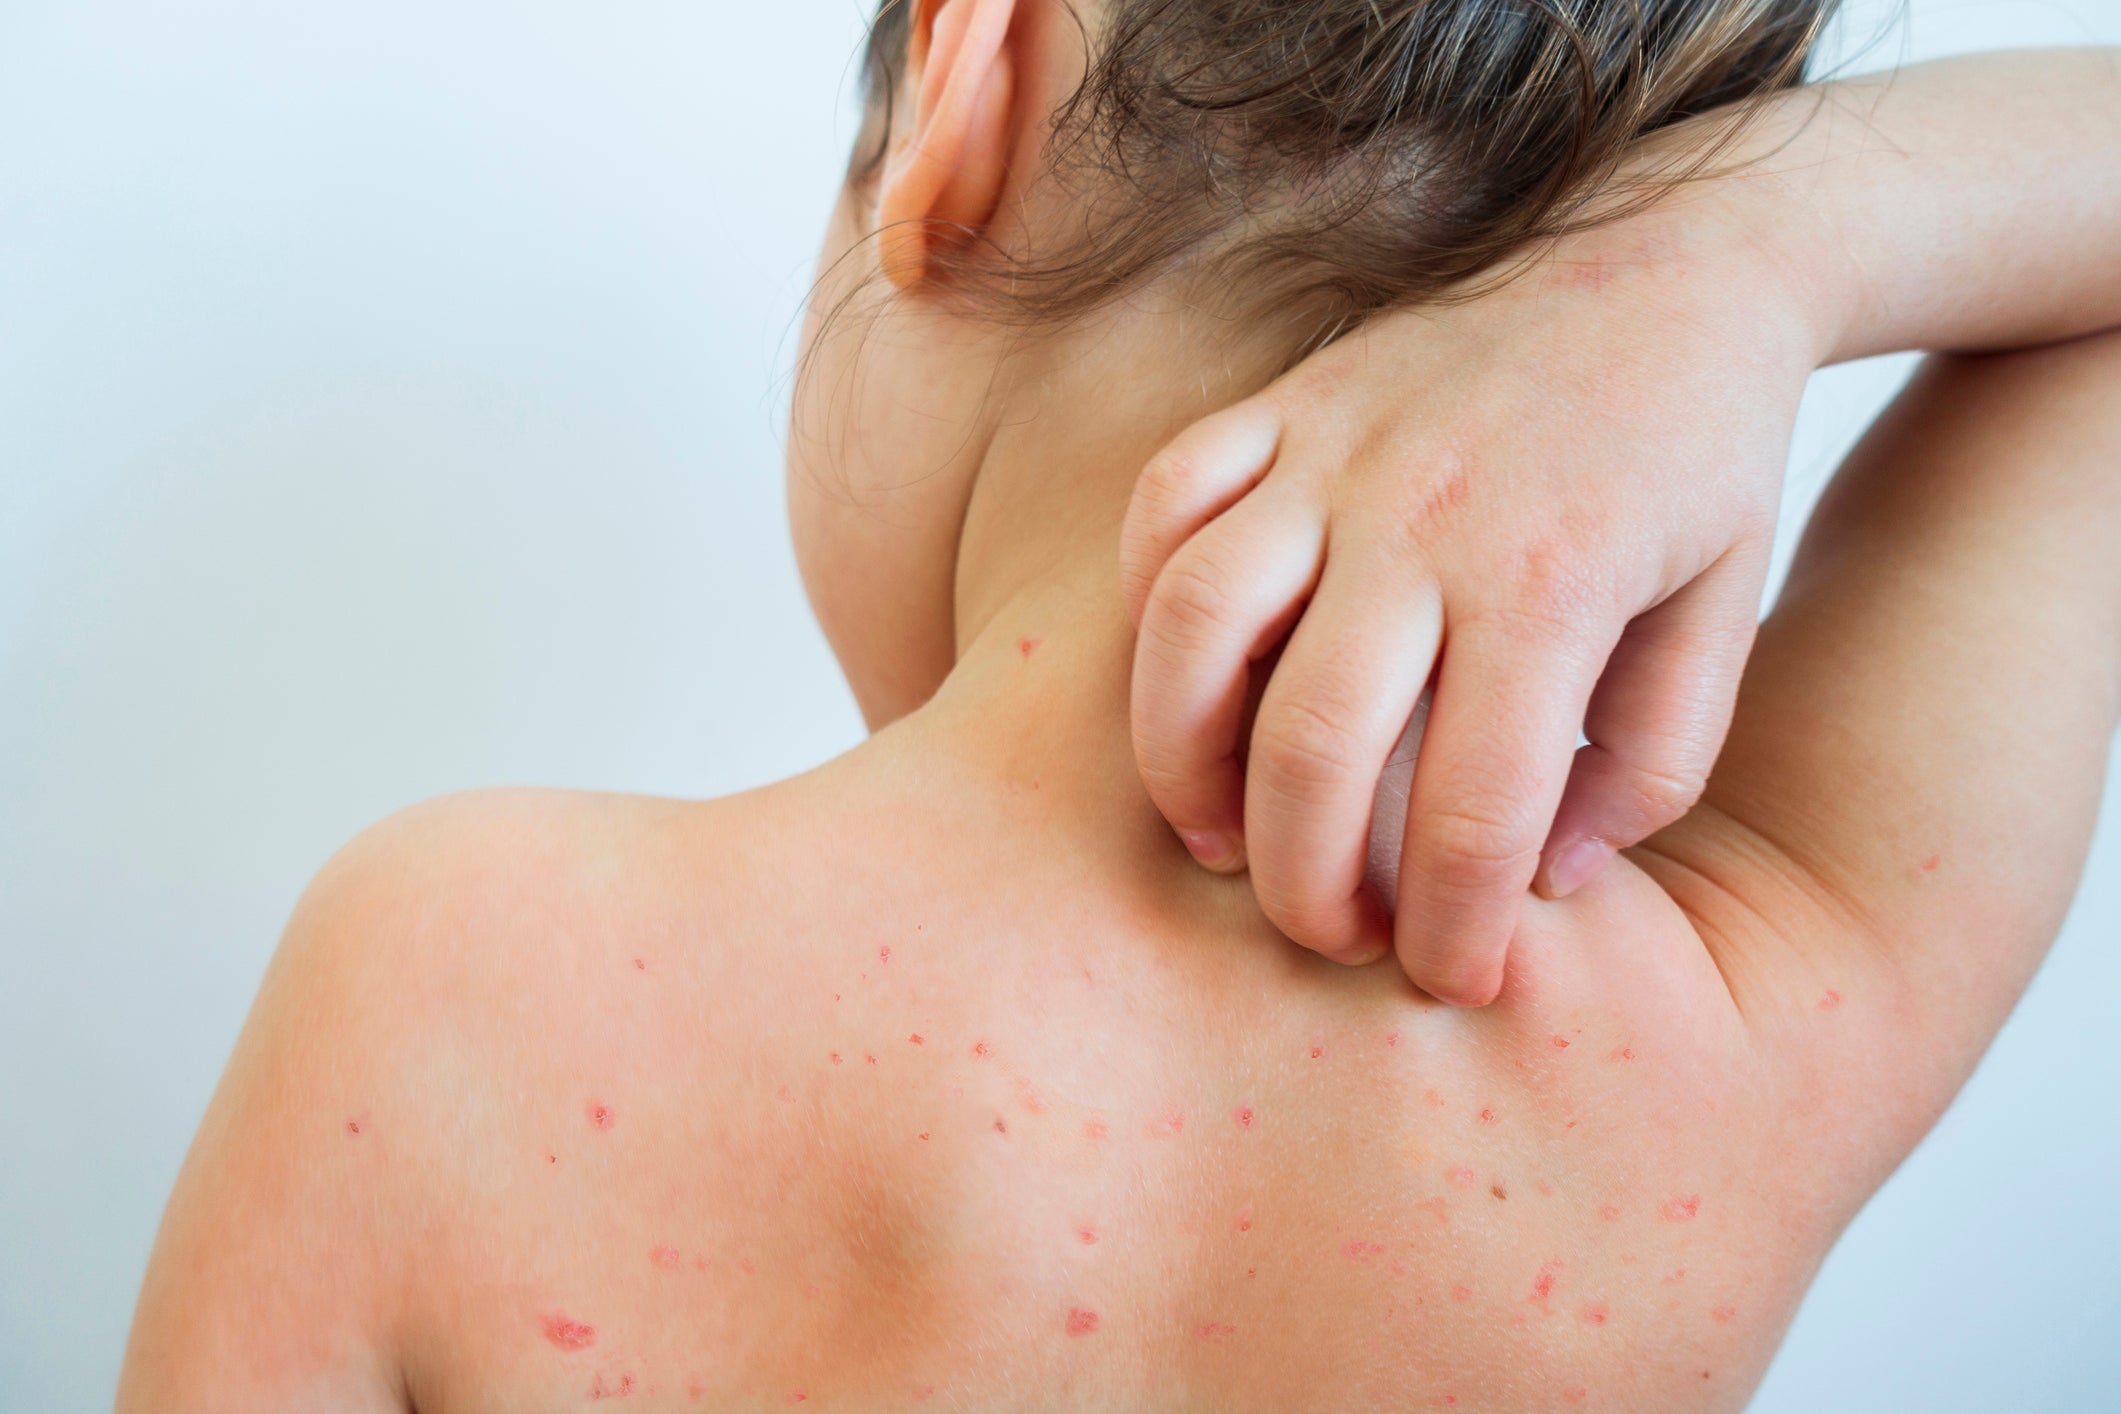 Like every other household in the UK containing a primary-aged small, it seems, chicken pox has arrived